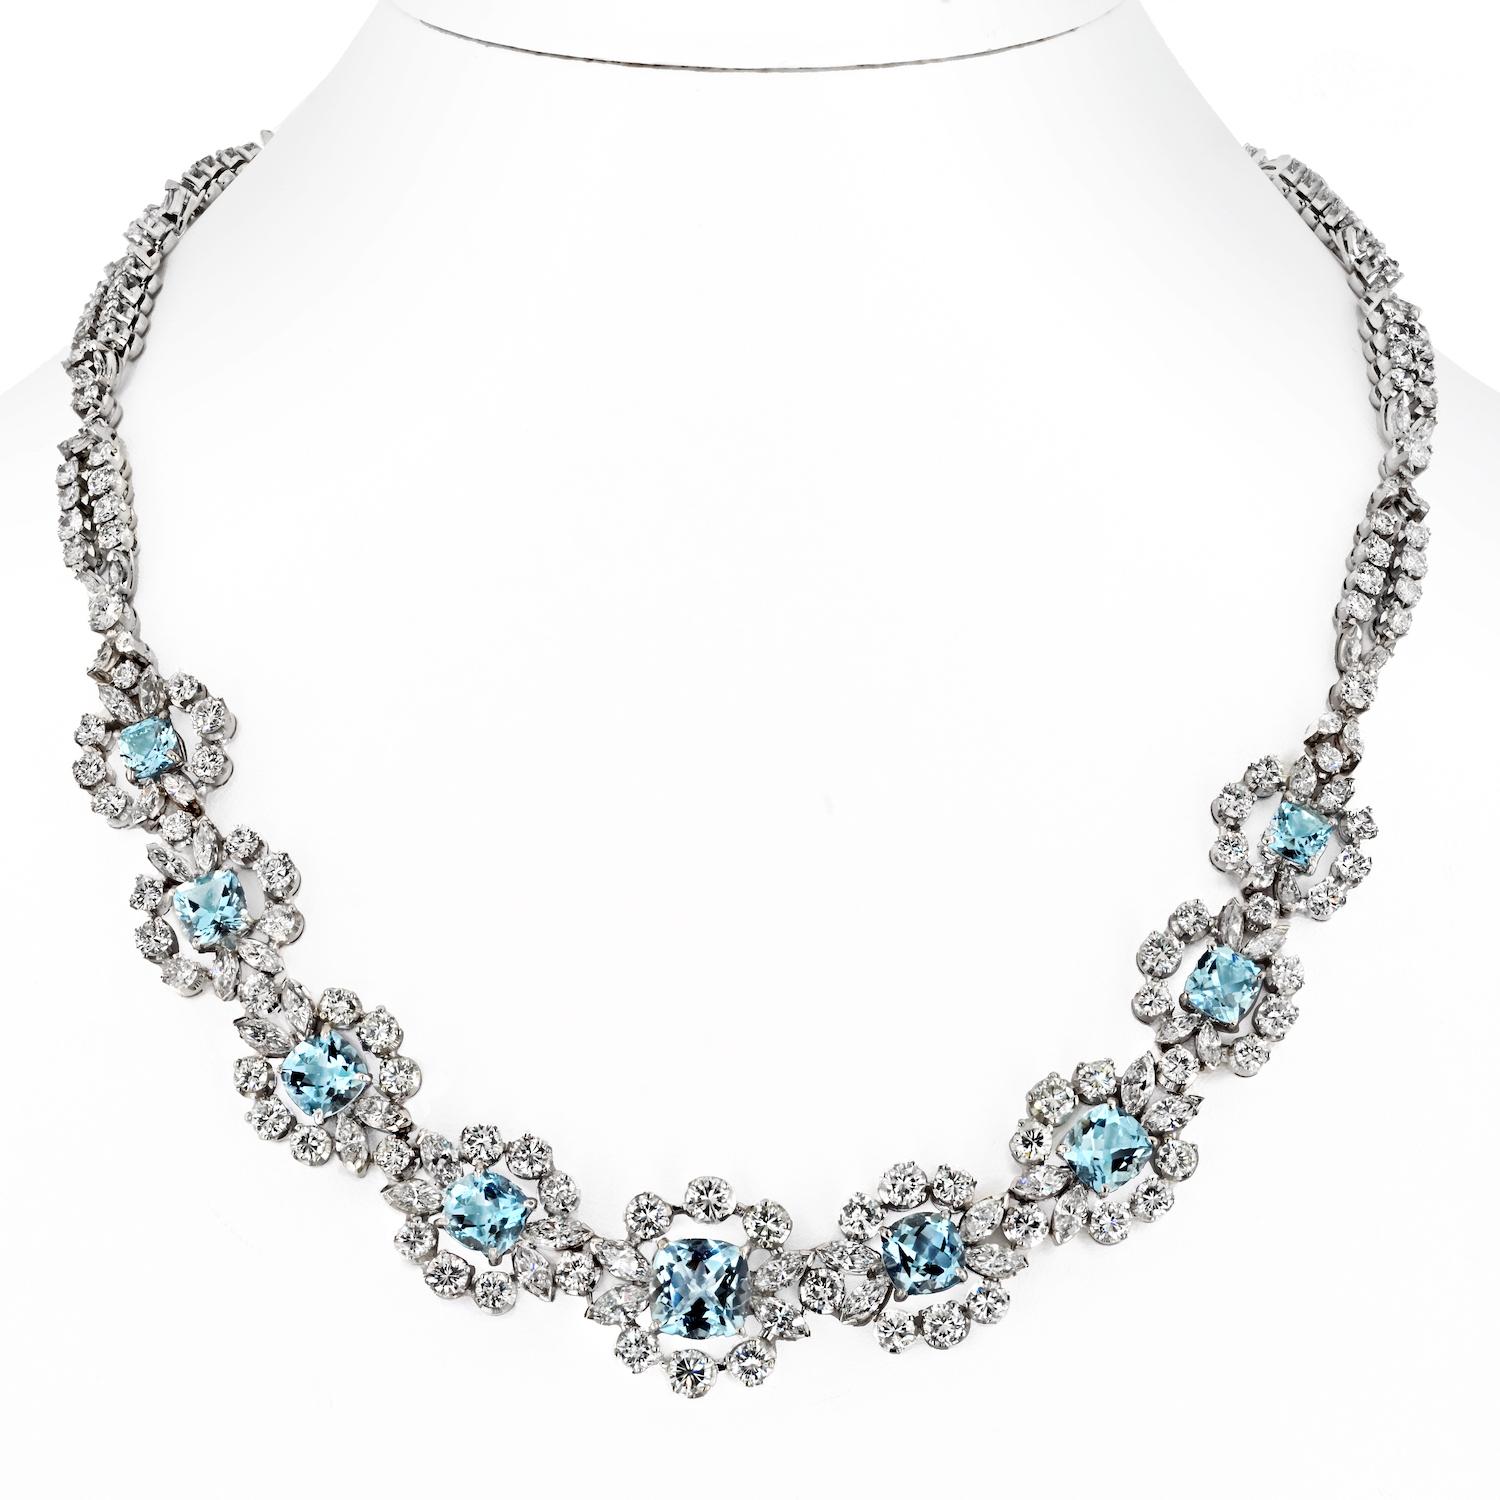 Elevate your style with this luxurious aquamarine and diamond necklace, perfect for your most special occasions. The light blue aquamarine stones, with their translucency and glossiness, create a dazzling interplay of light. This piece exudes a